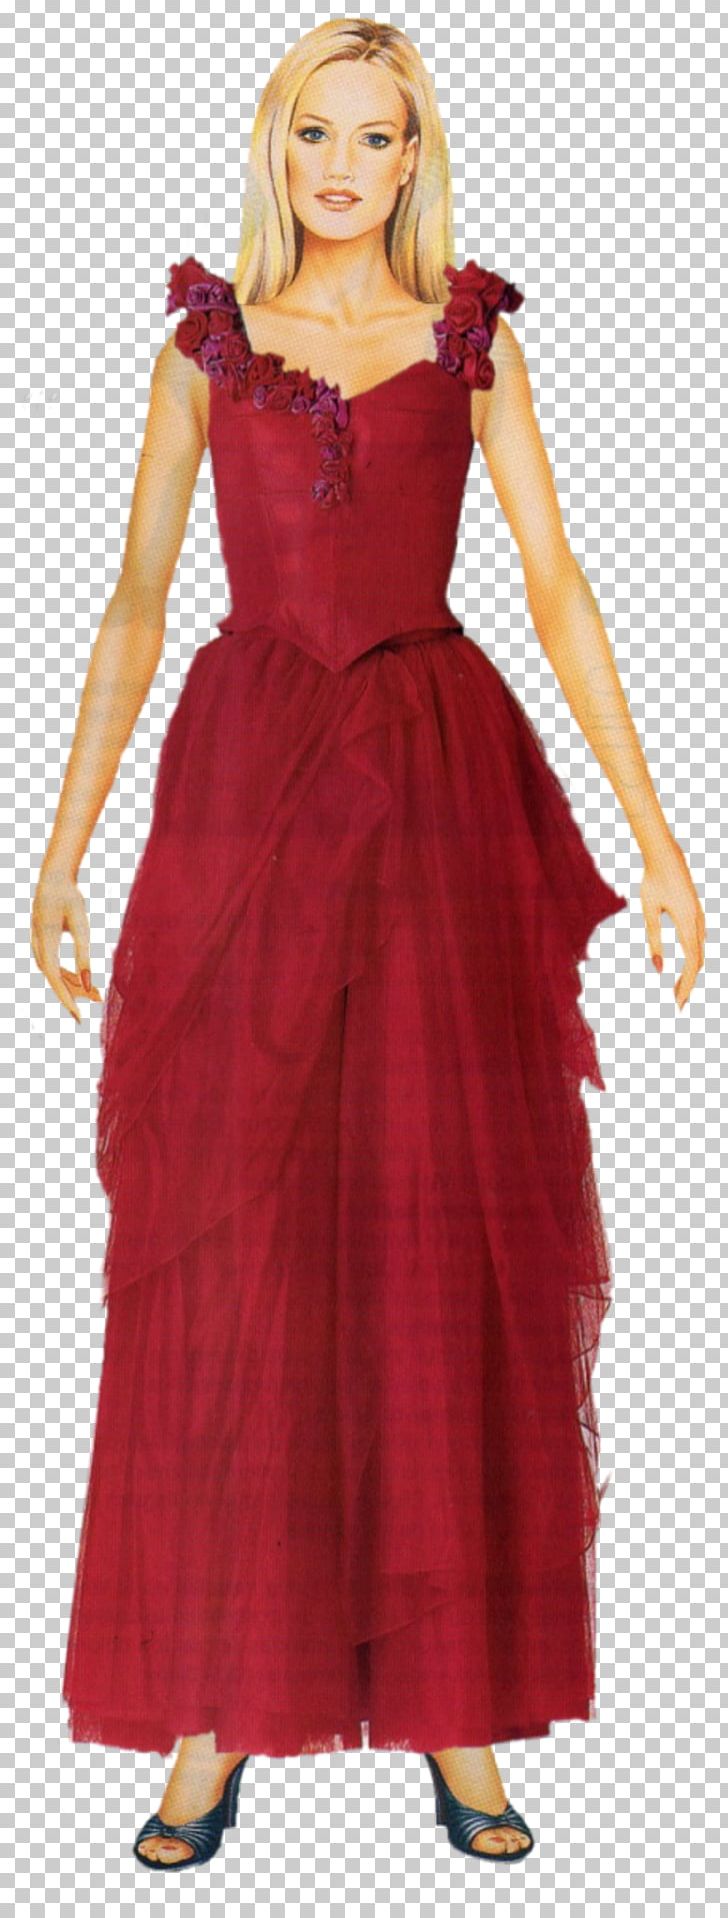 Shoulder Dress Gown Costume PNG, Clipart, Clothing, Costume, Costume Design, Day Dress, Dress Free PNG Download